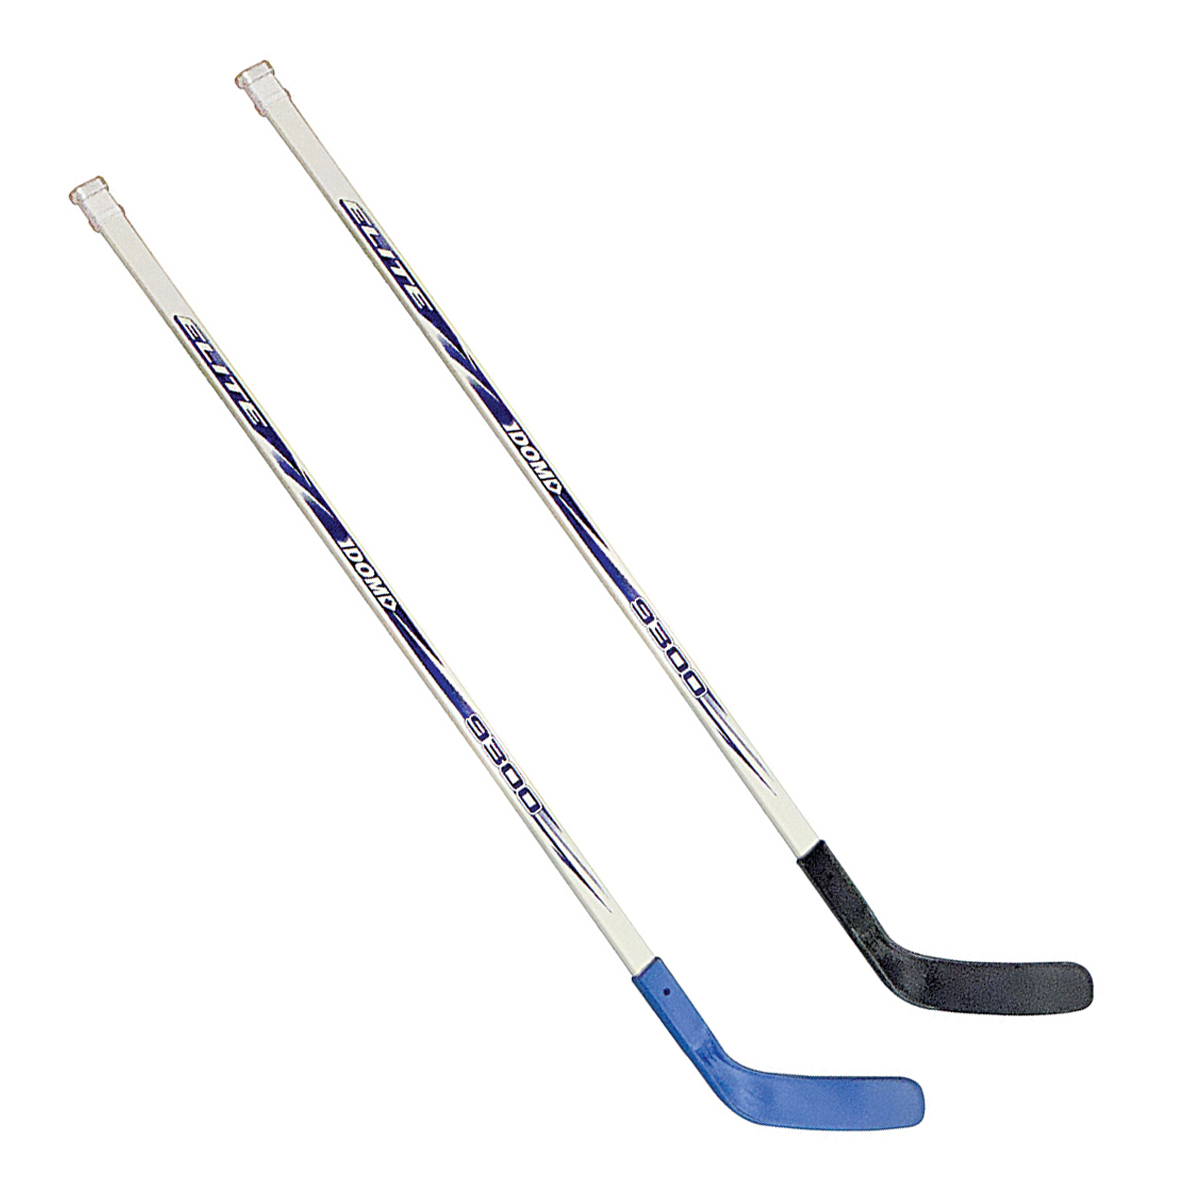 54" DOM replacement sticks